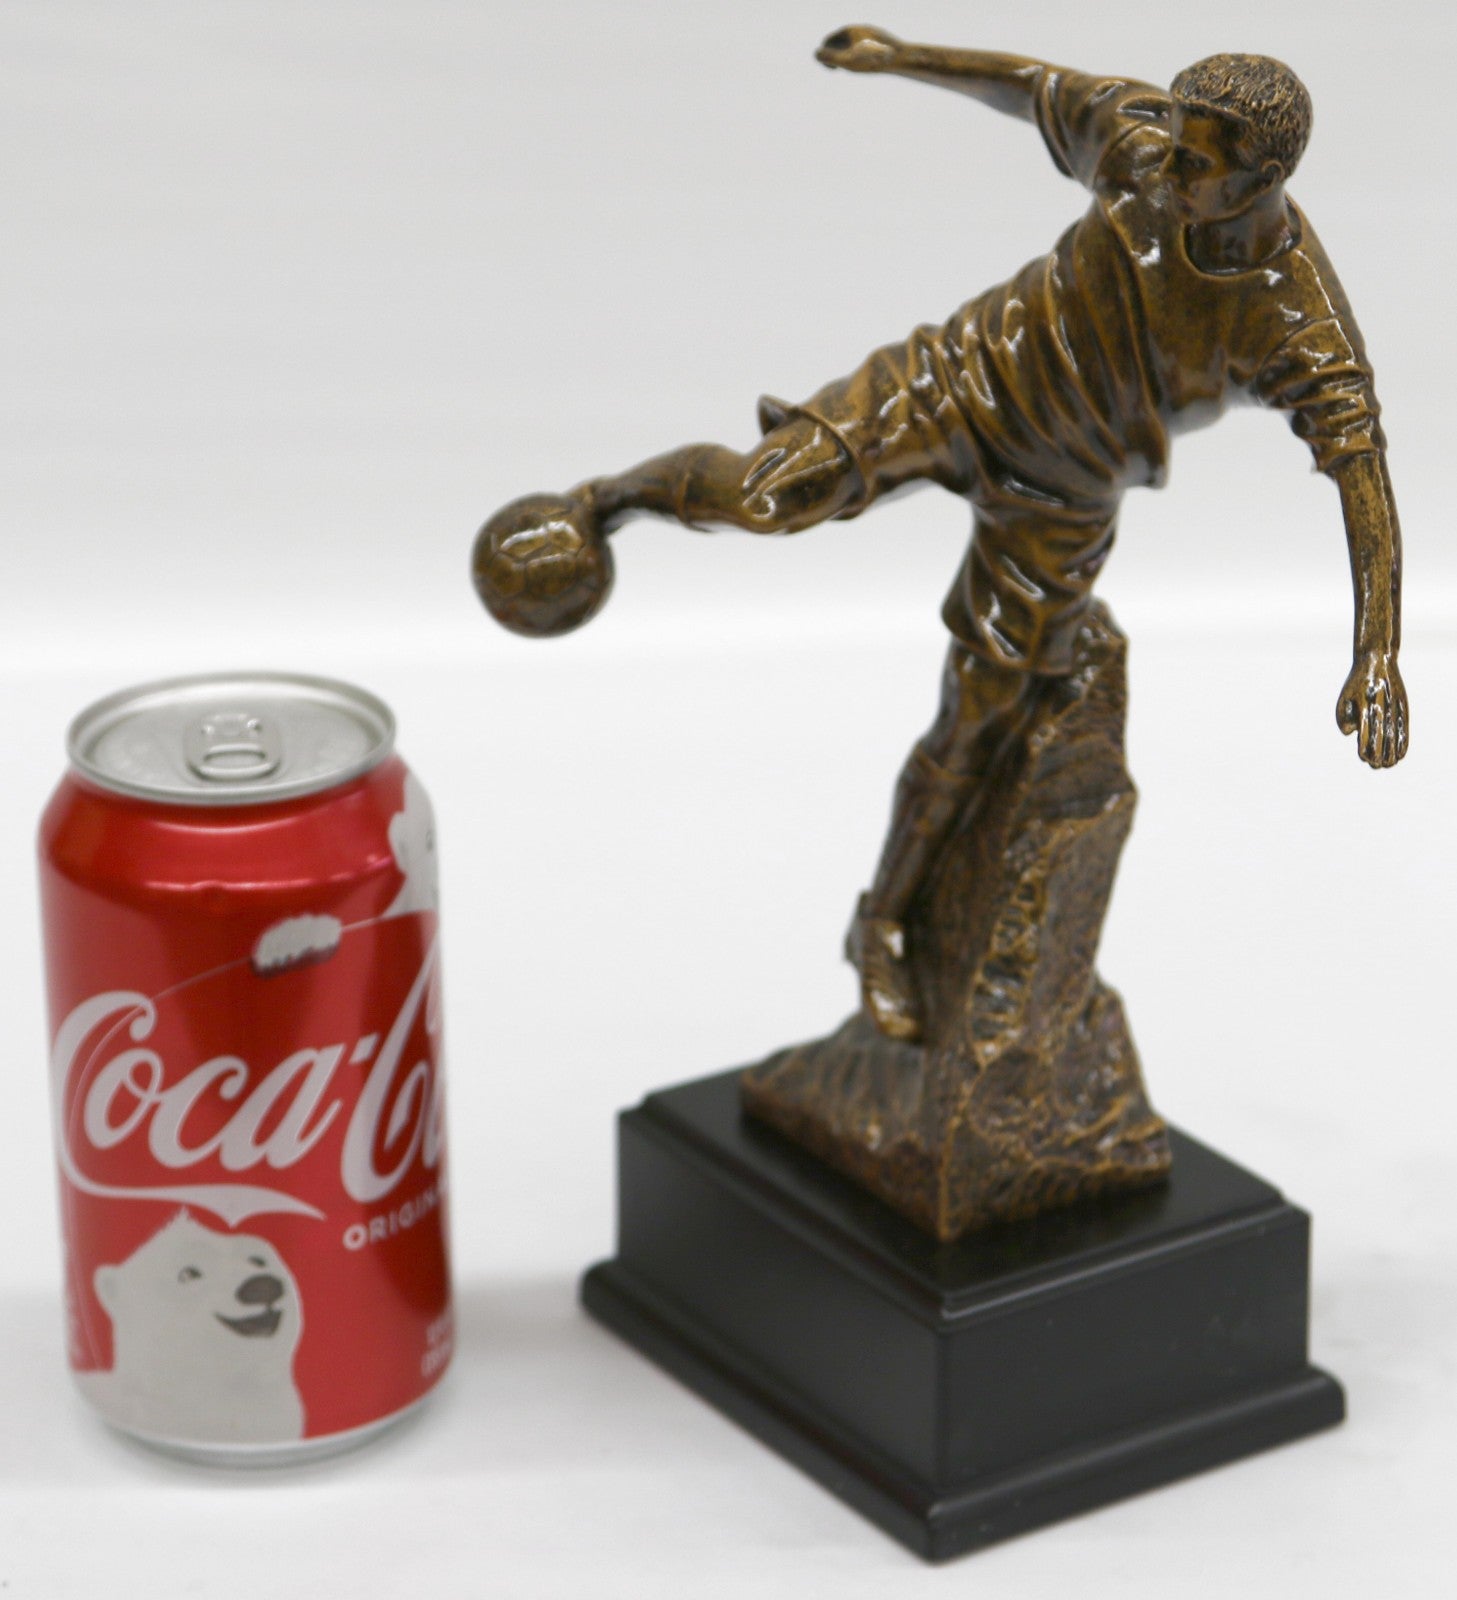 Hand Made Bronze Look Sculpture Football Soccer player Trophy Statue on Base